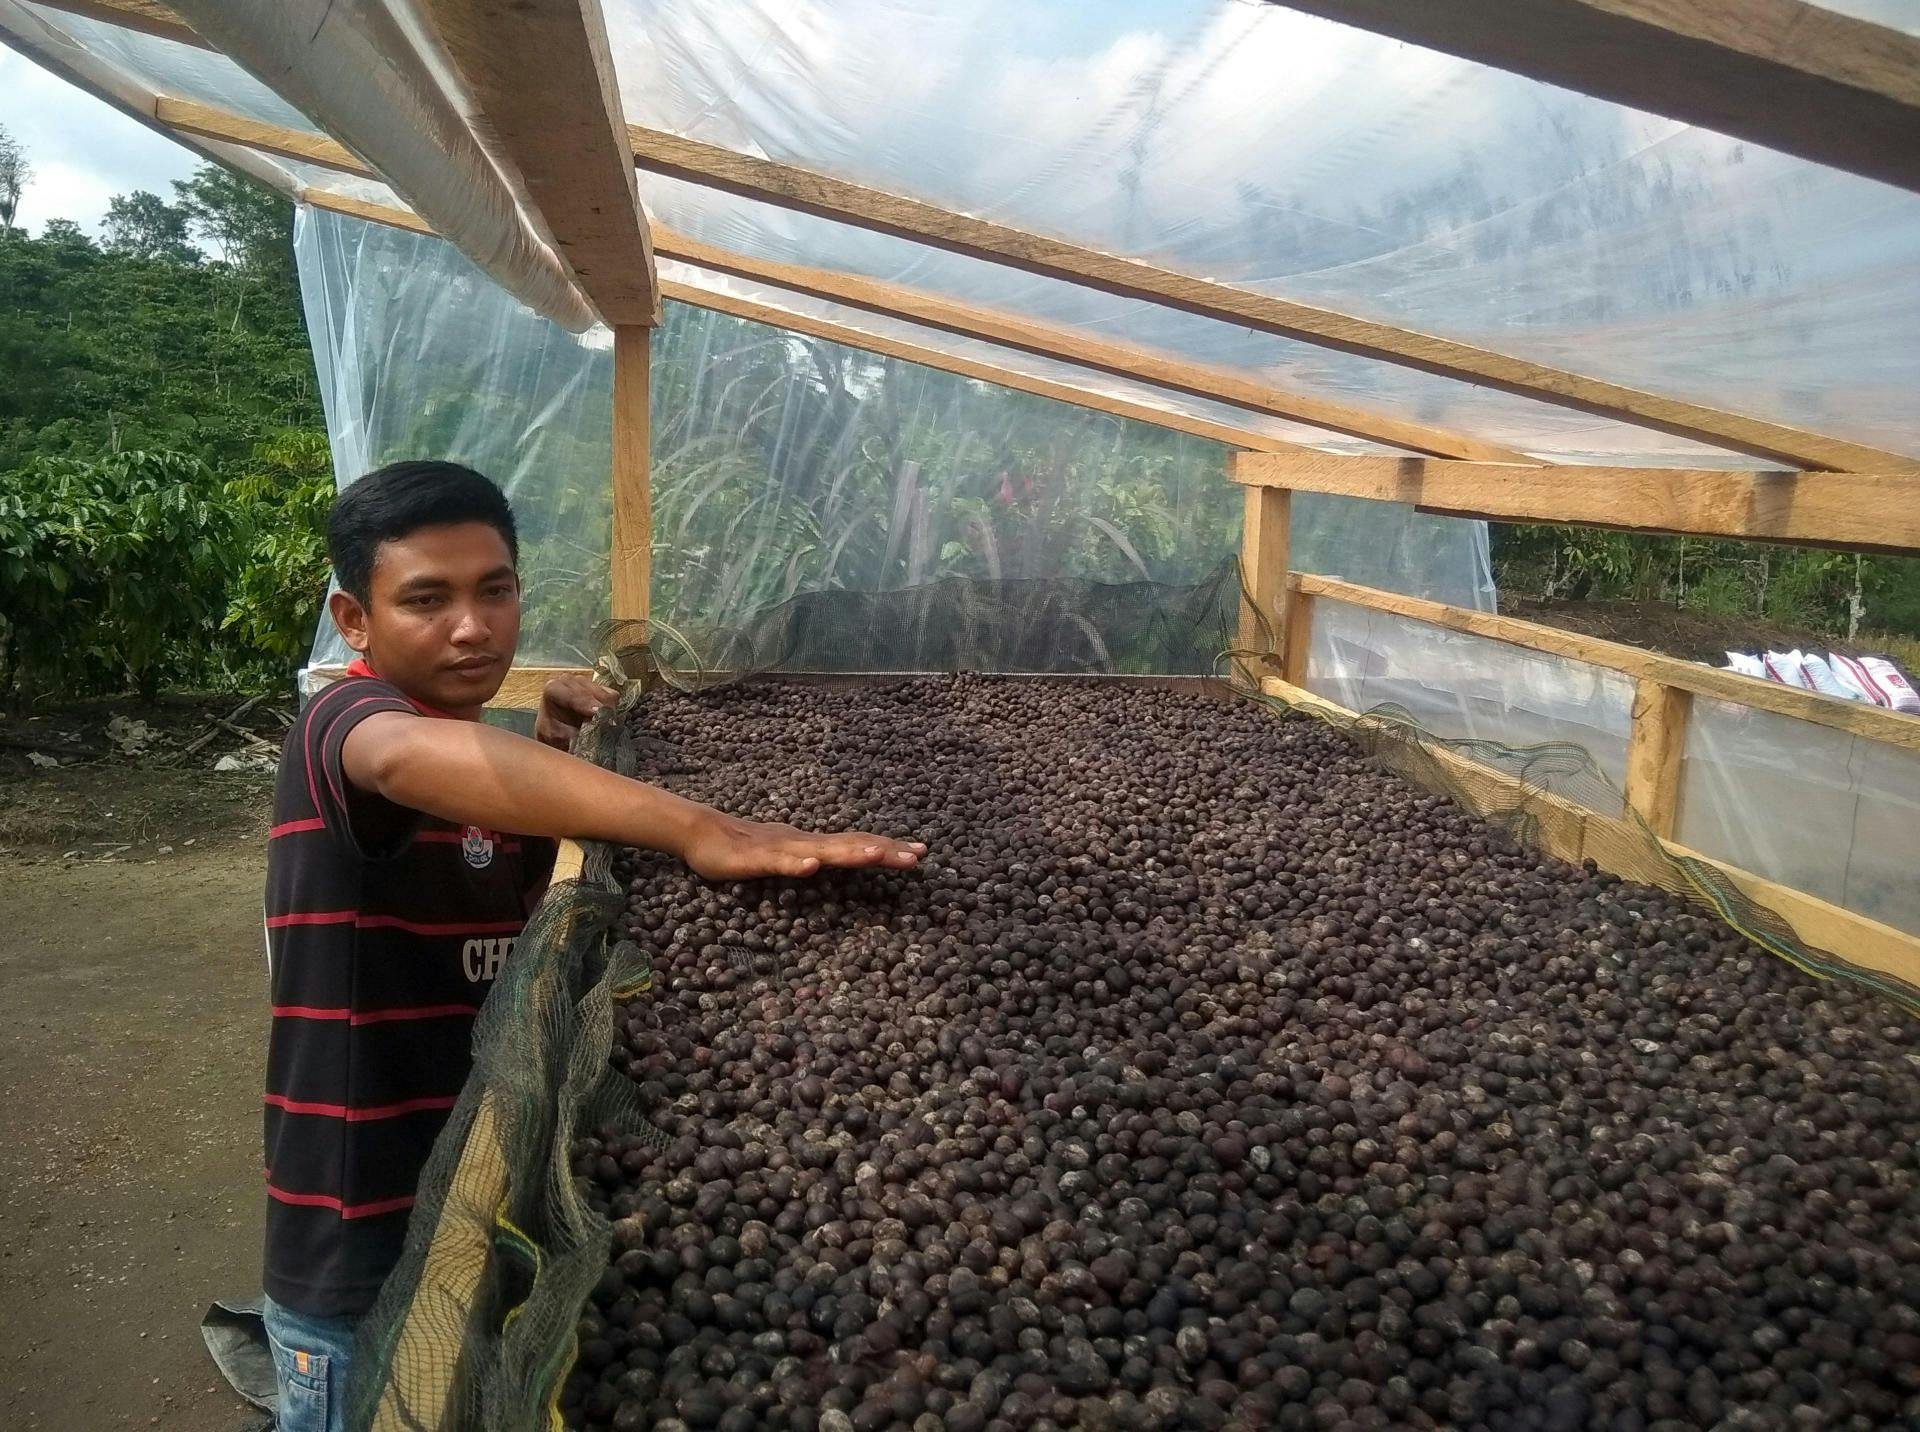 An innovative young farmer with a passion for improving coffee cultivation